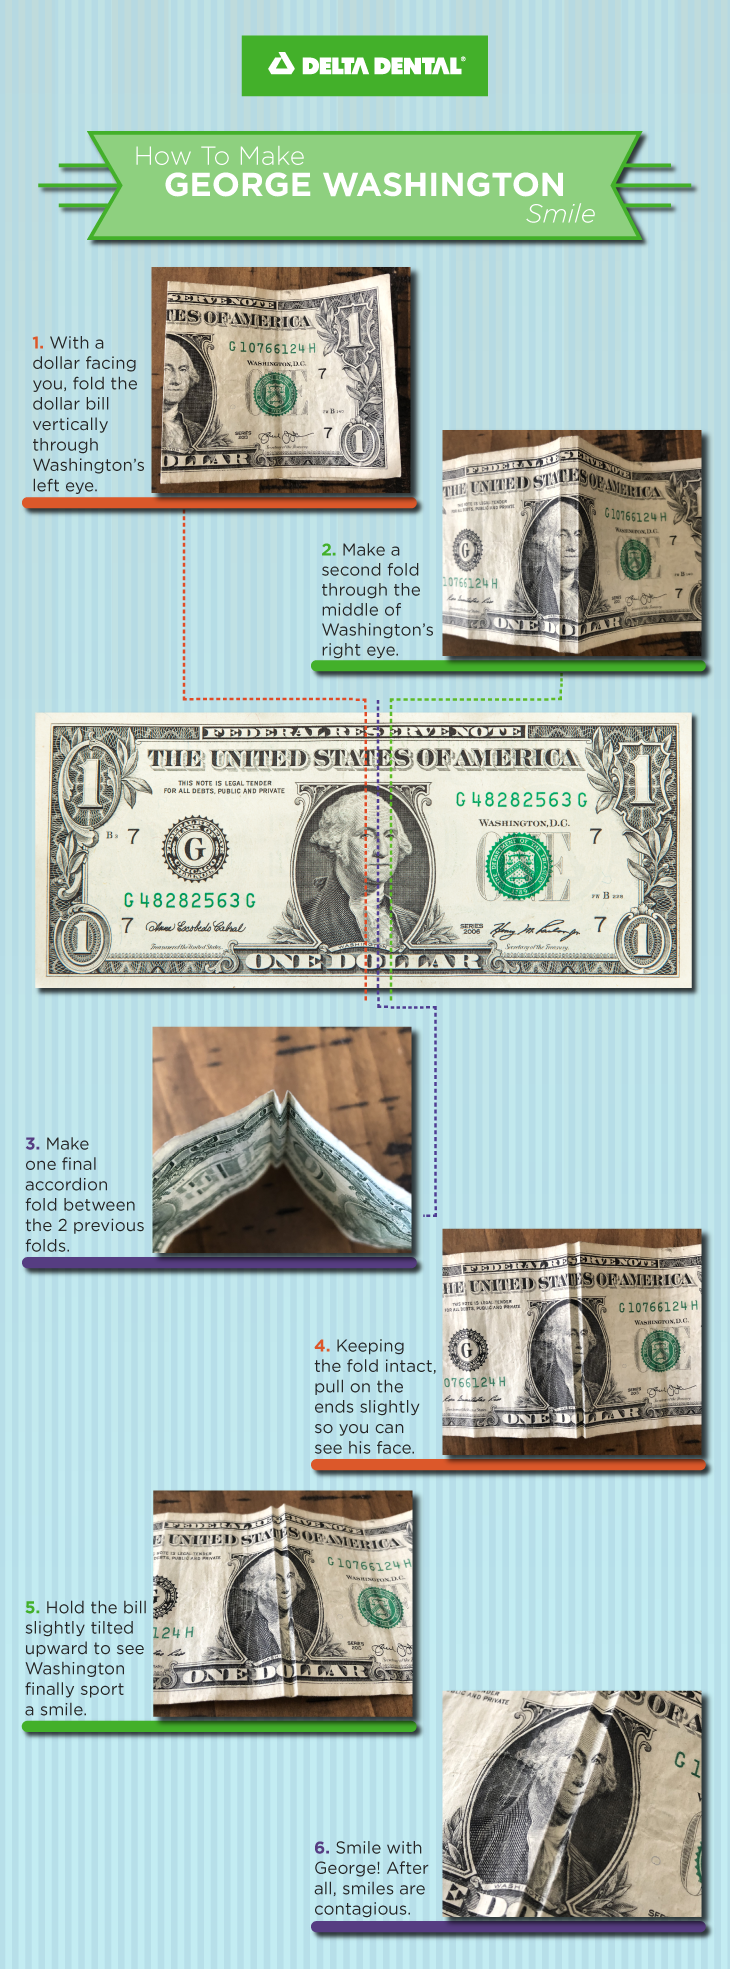 Grab a dollar bill and turn Washington’s frown upside down with this quick and easy dental-themed cr